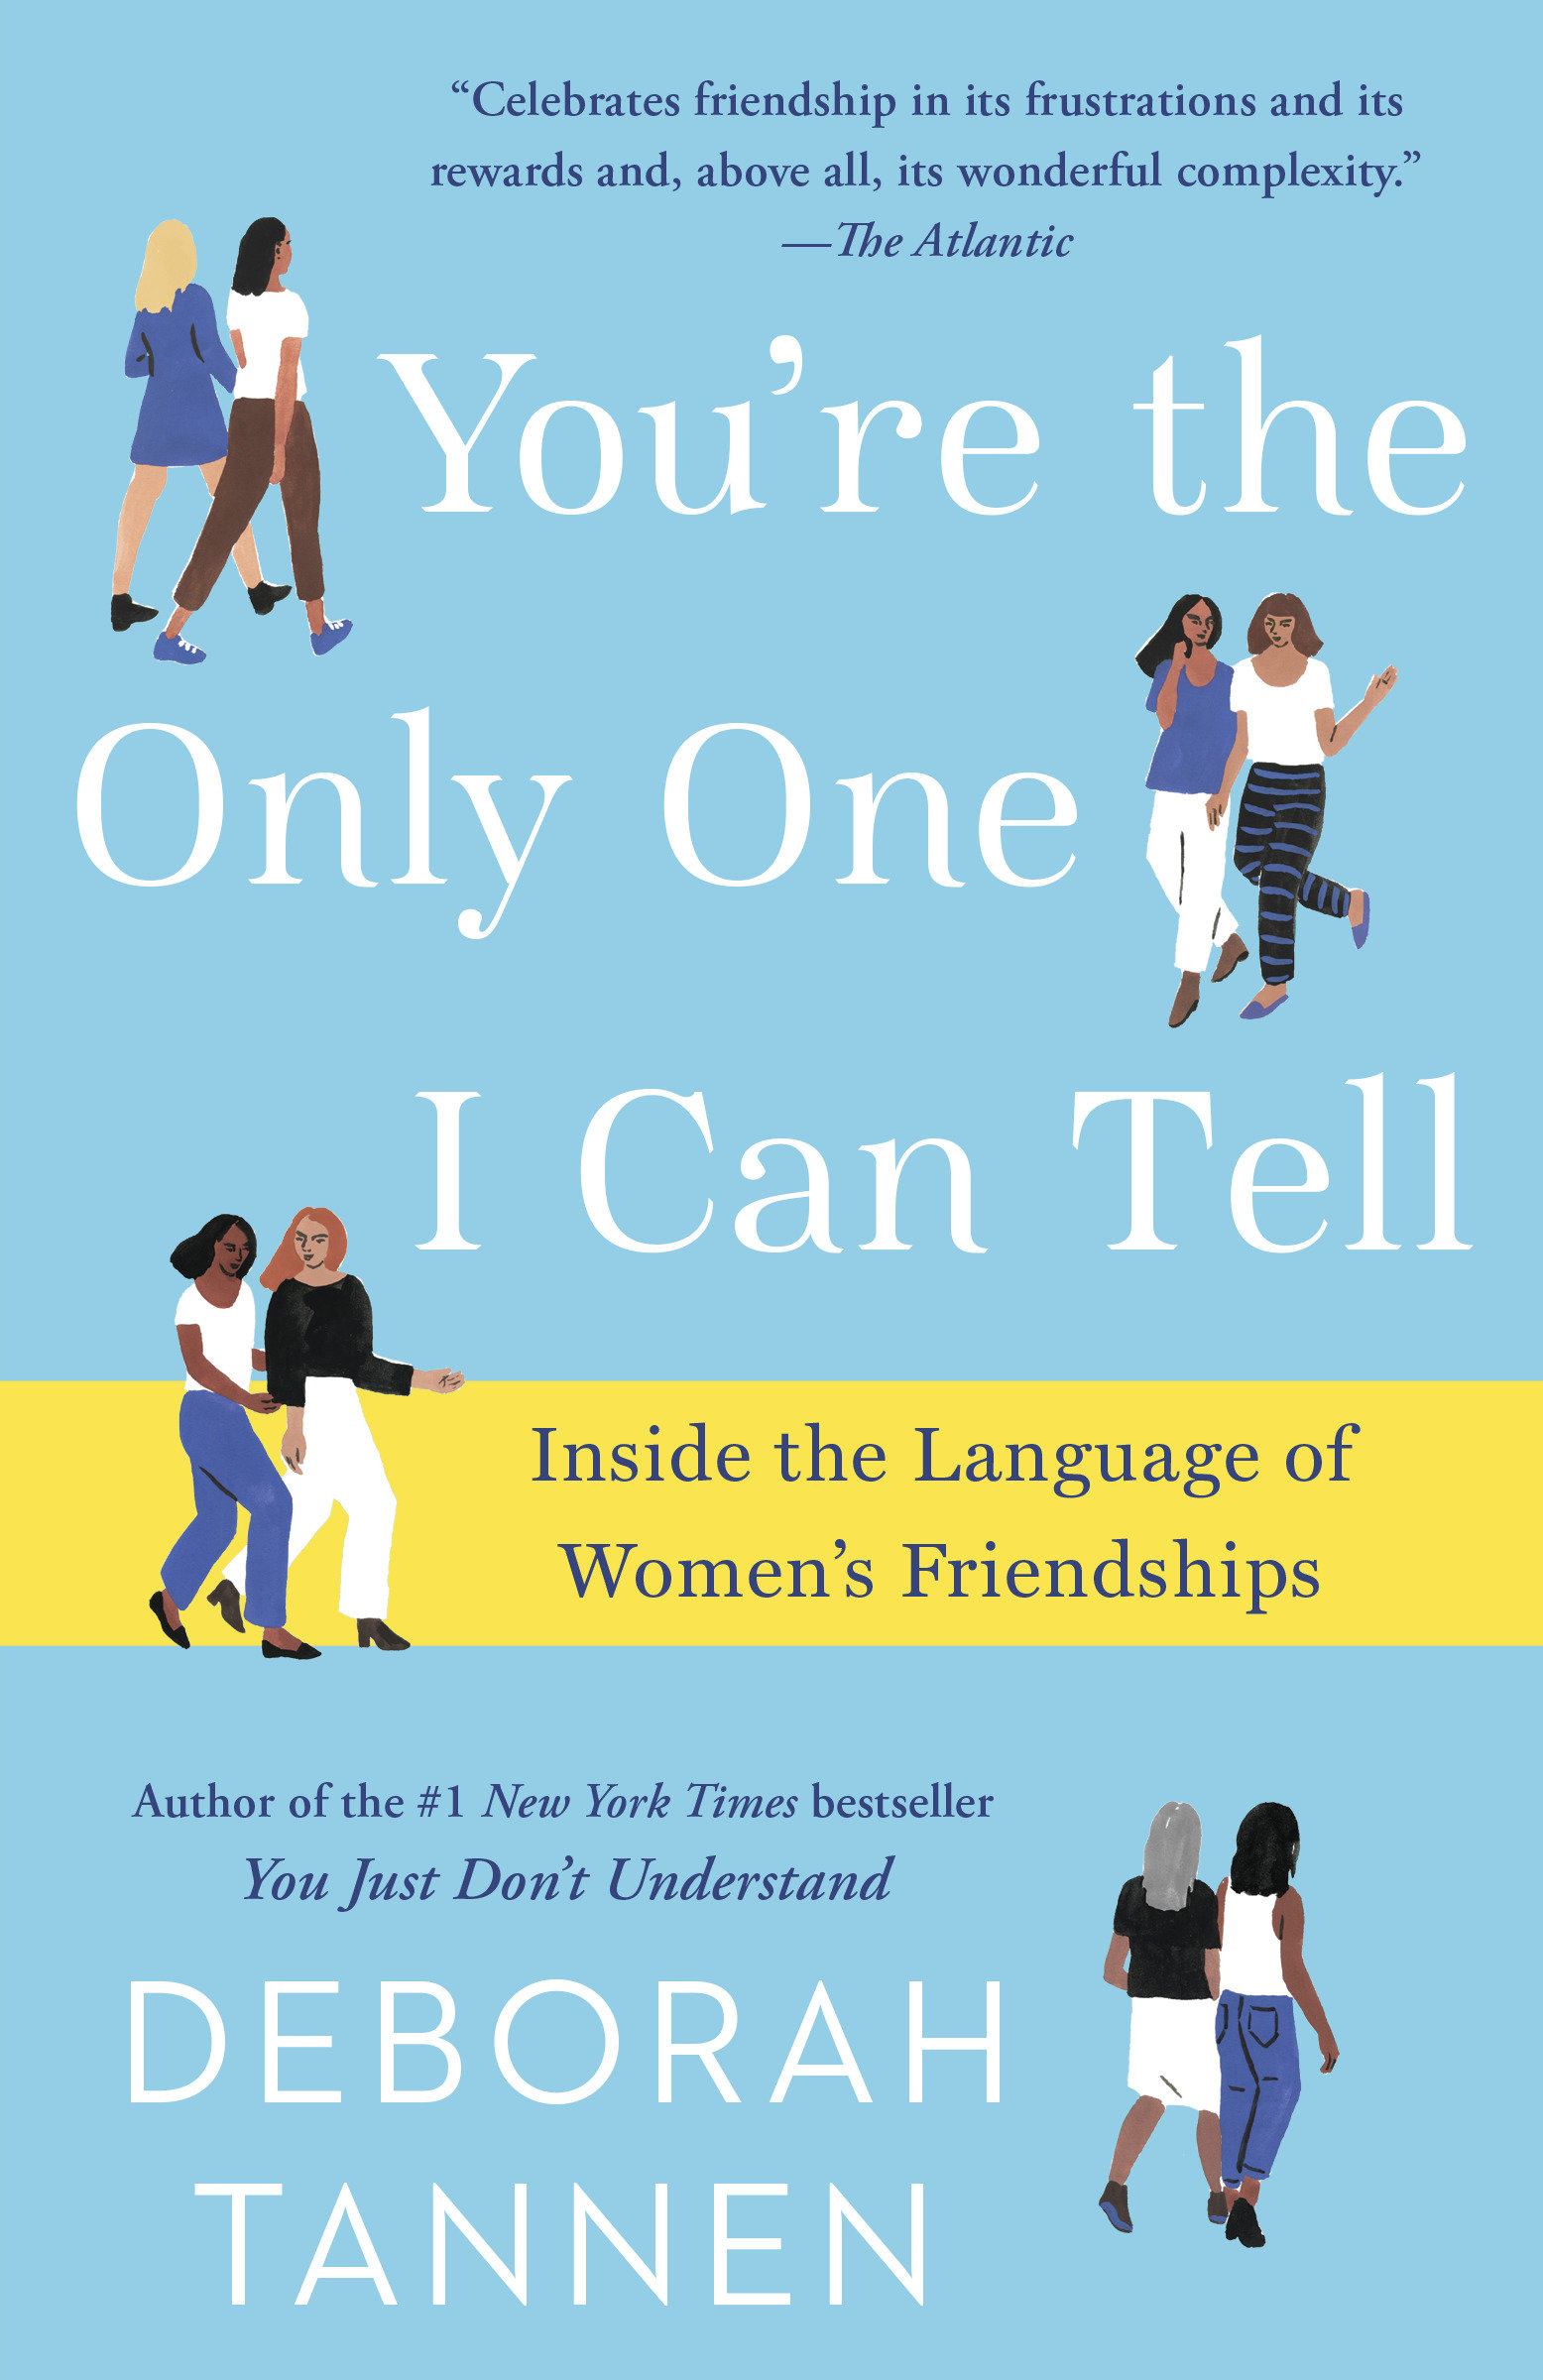 You're the only one I can tell inside the language of women's friendships cover image